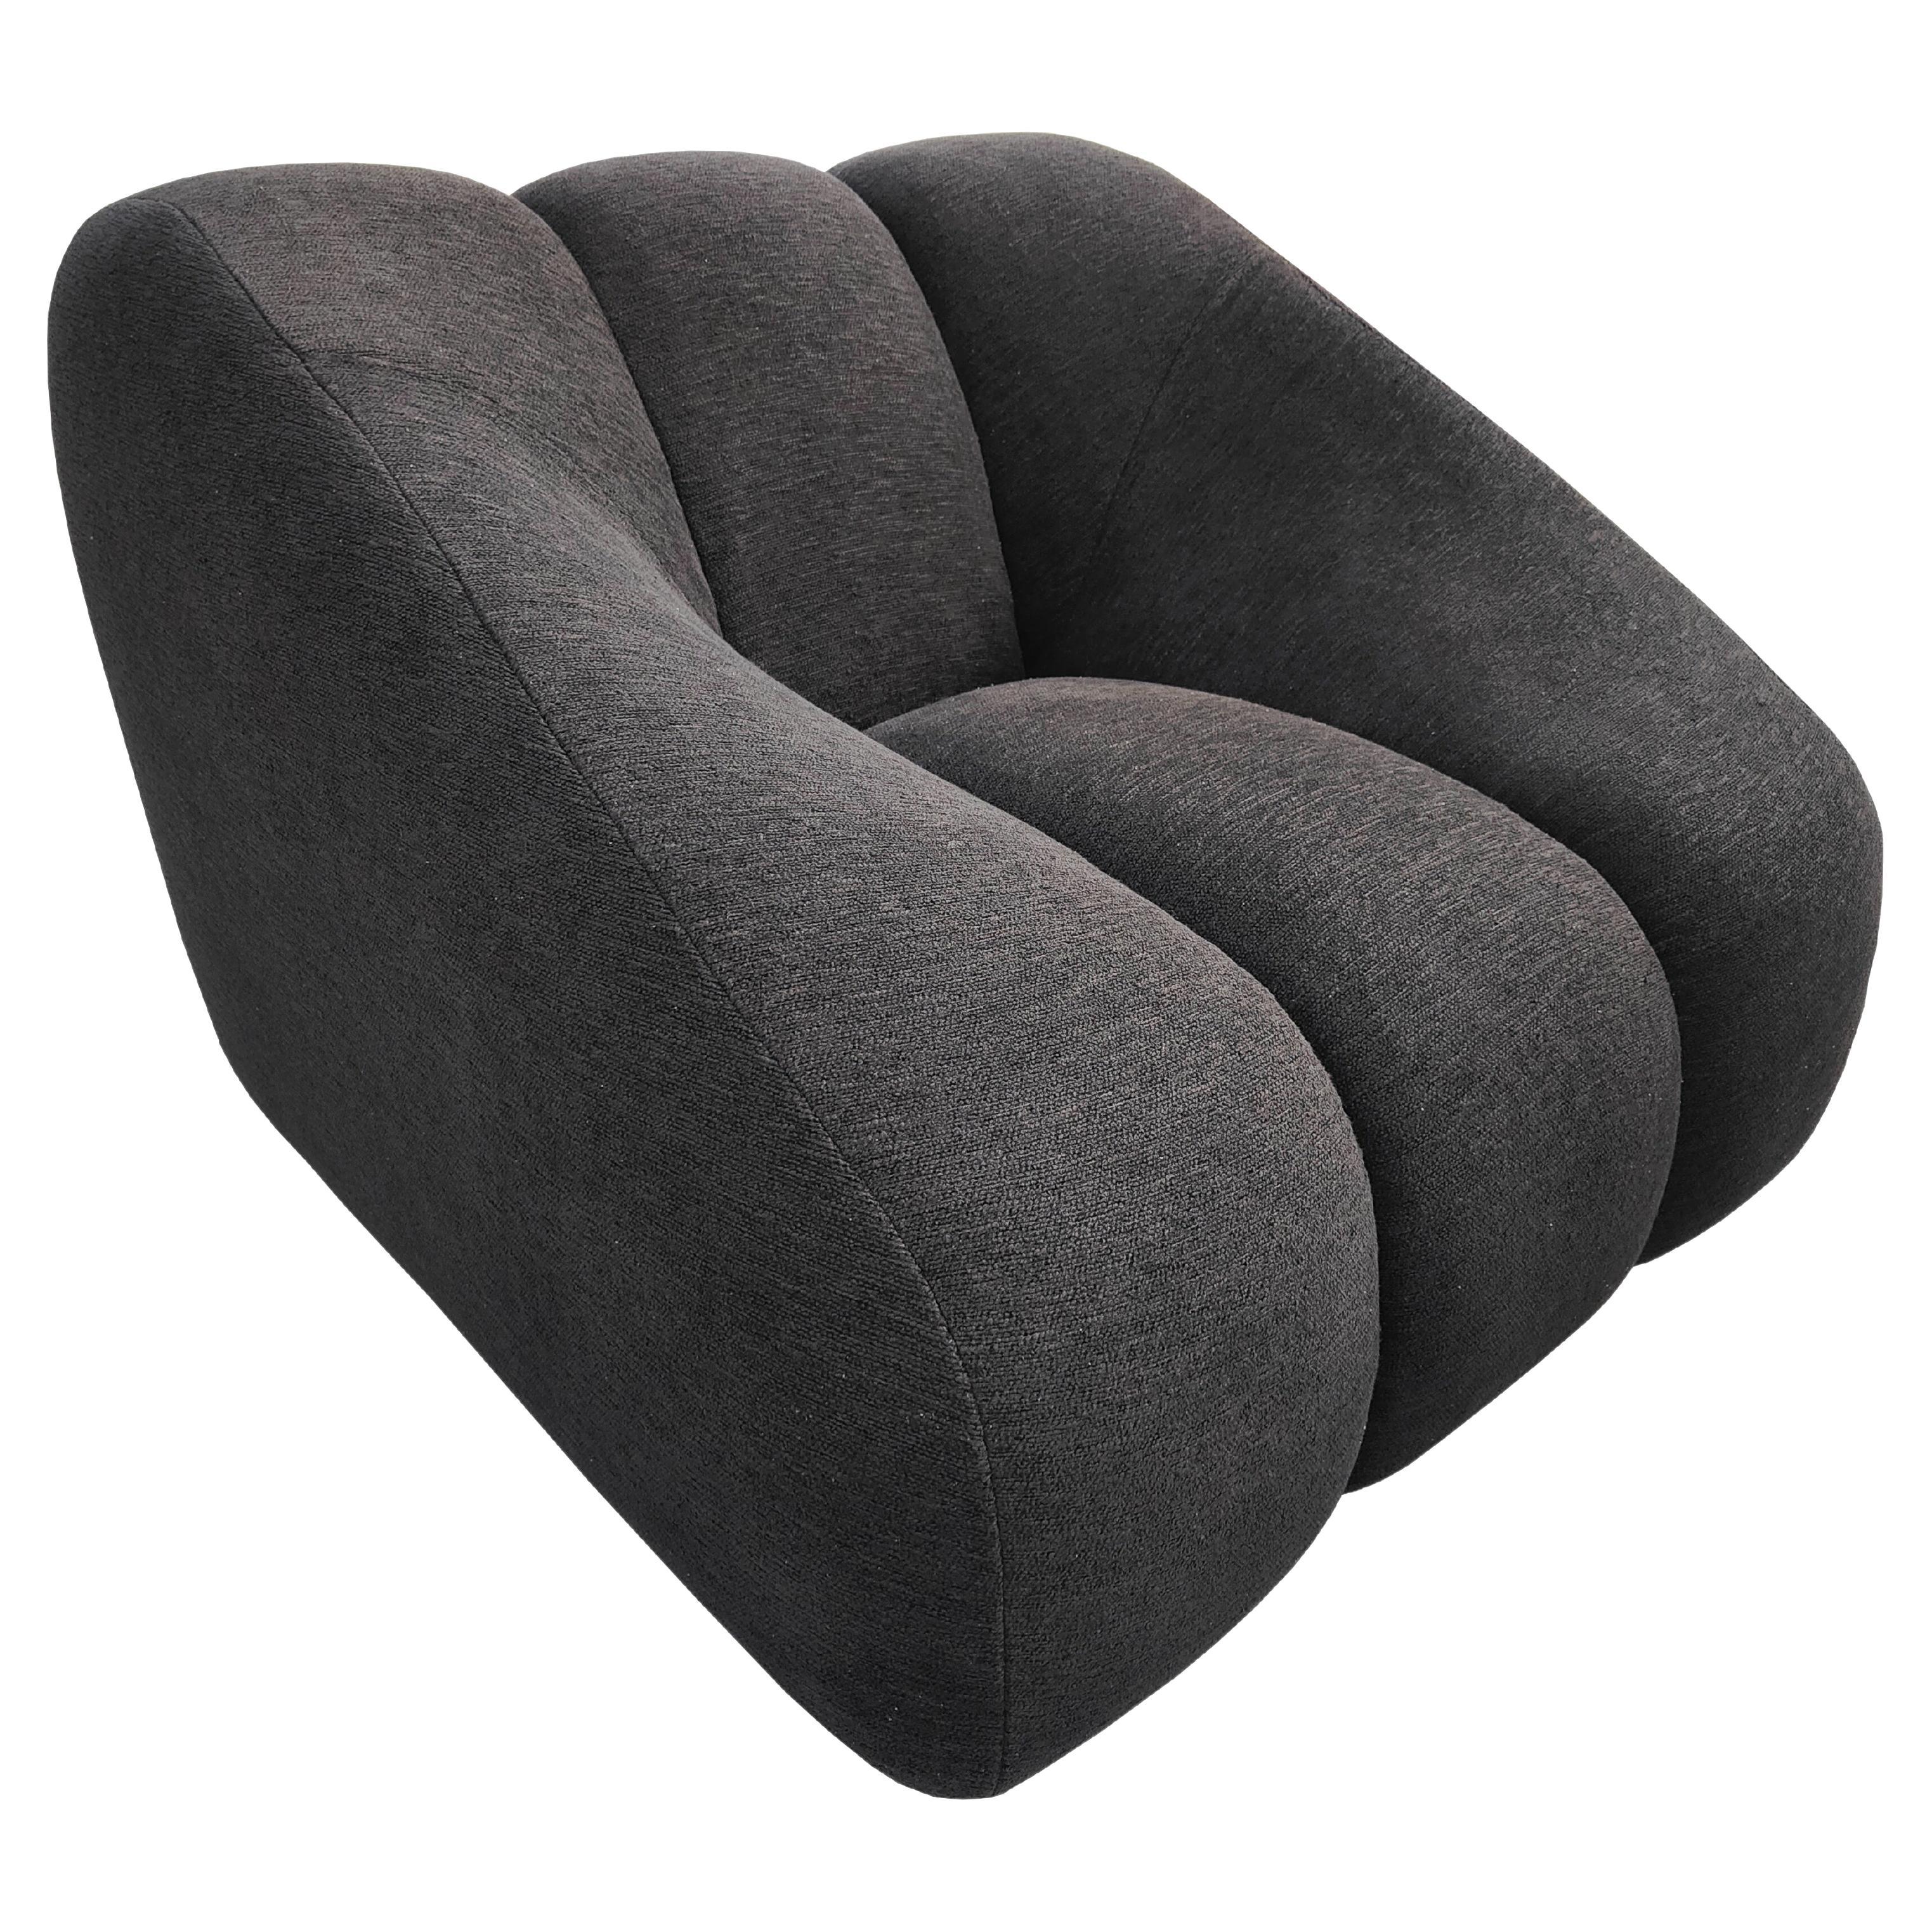 NEW armchair in black fabric. By Legame Italia